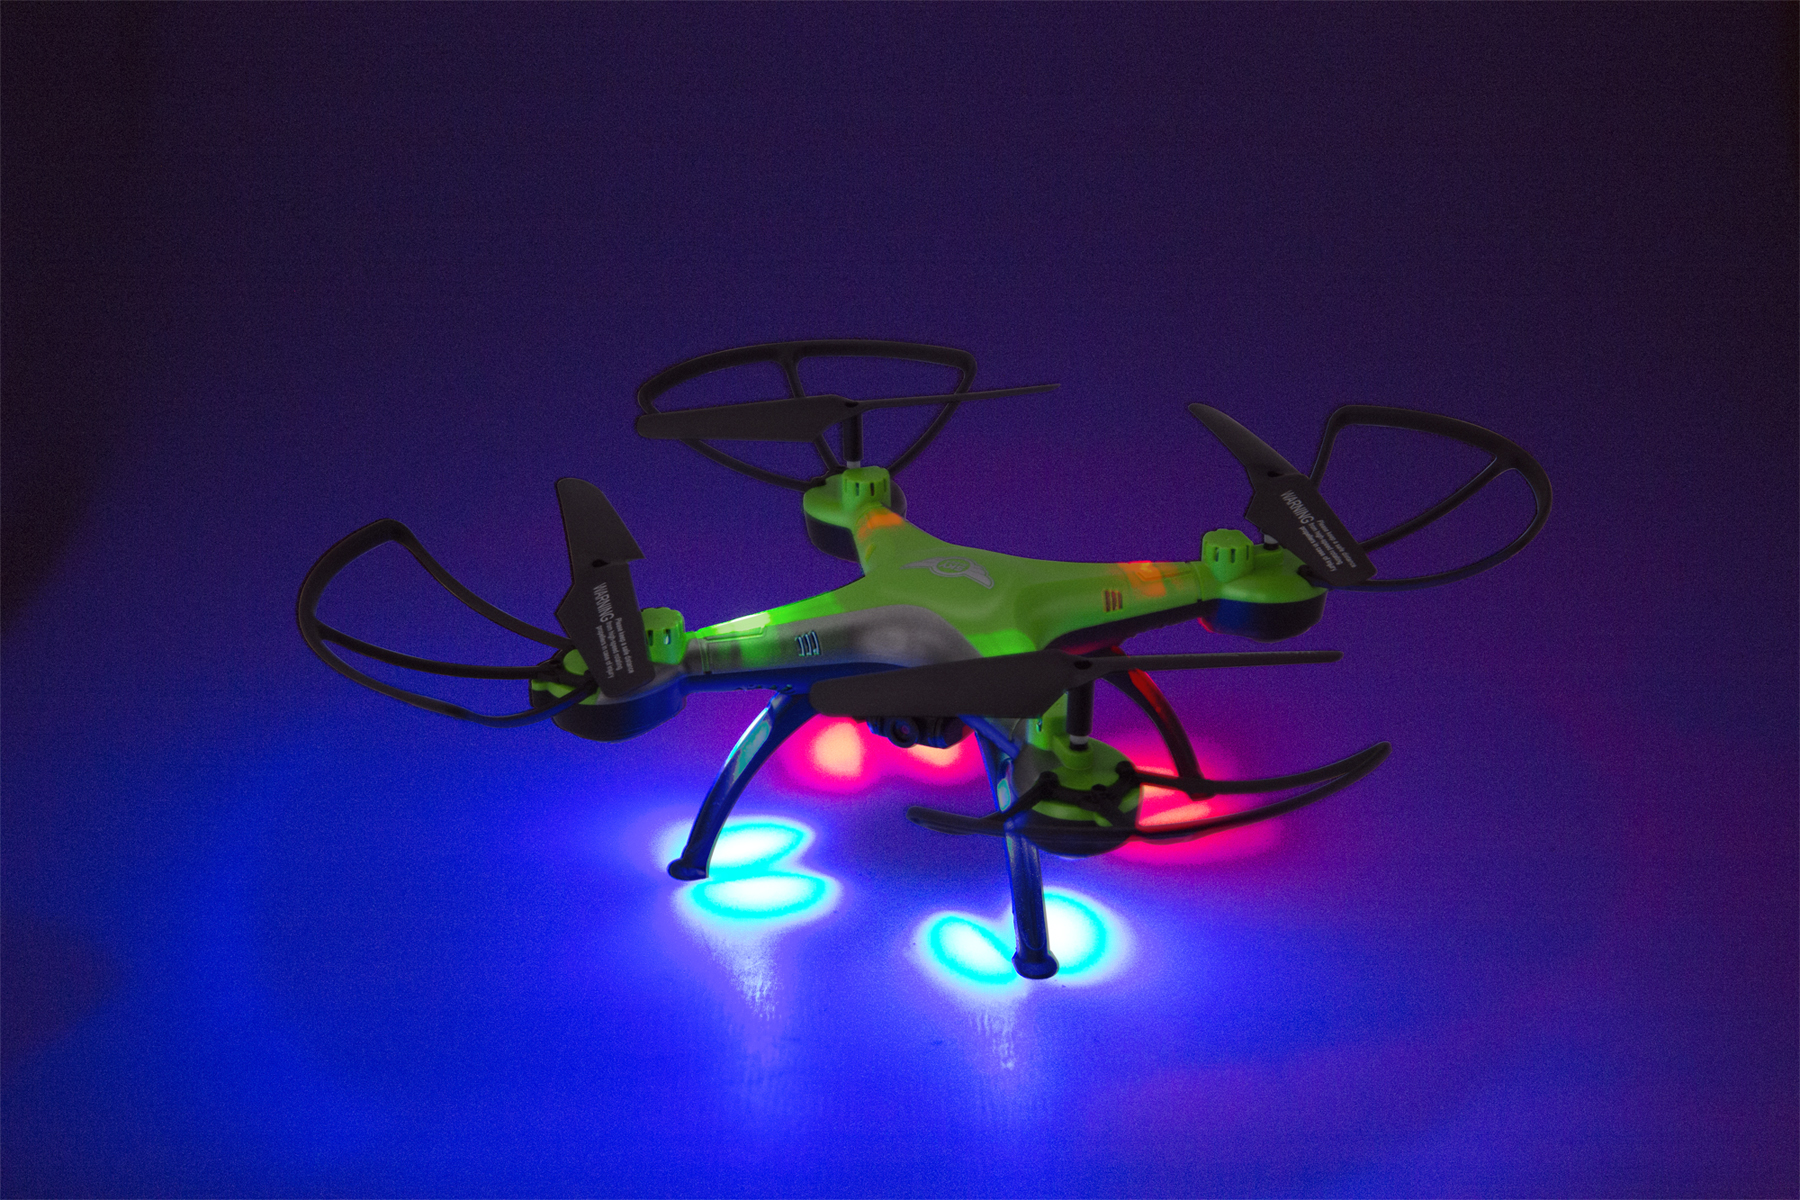 Sky Rider Thunderbird 2 Quadcopter Drone with Wi-Fi Camera, DRW330, Green - image 4 of 5